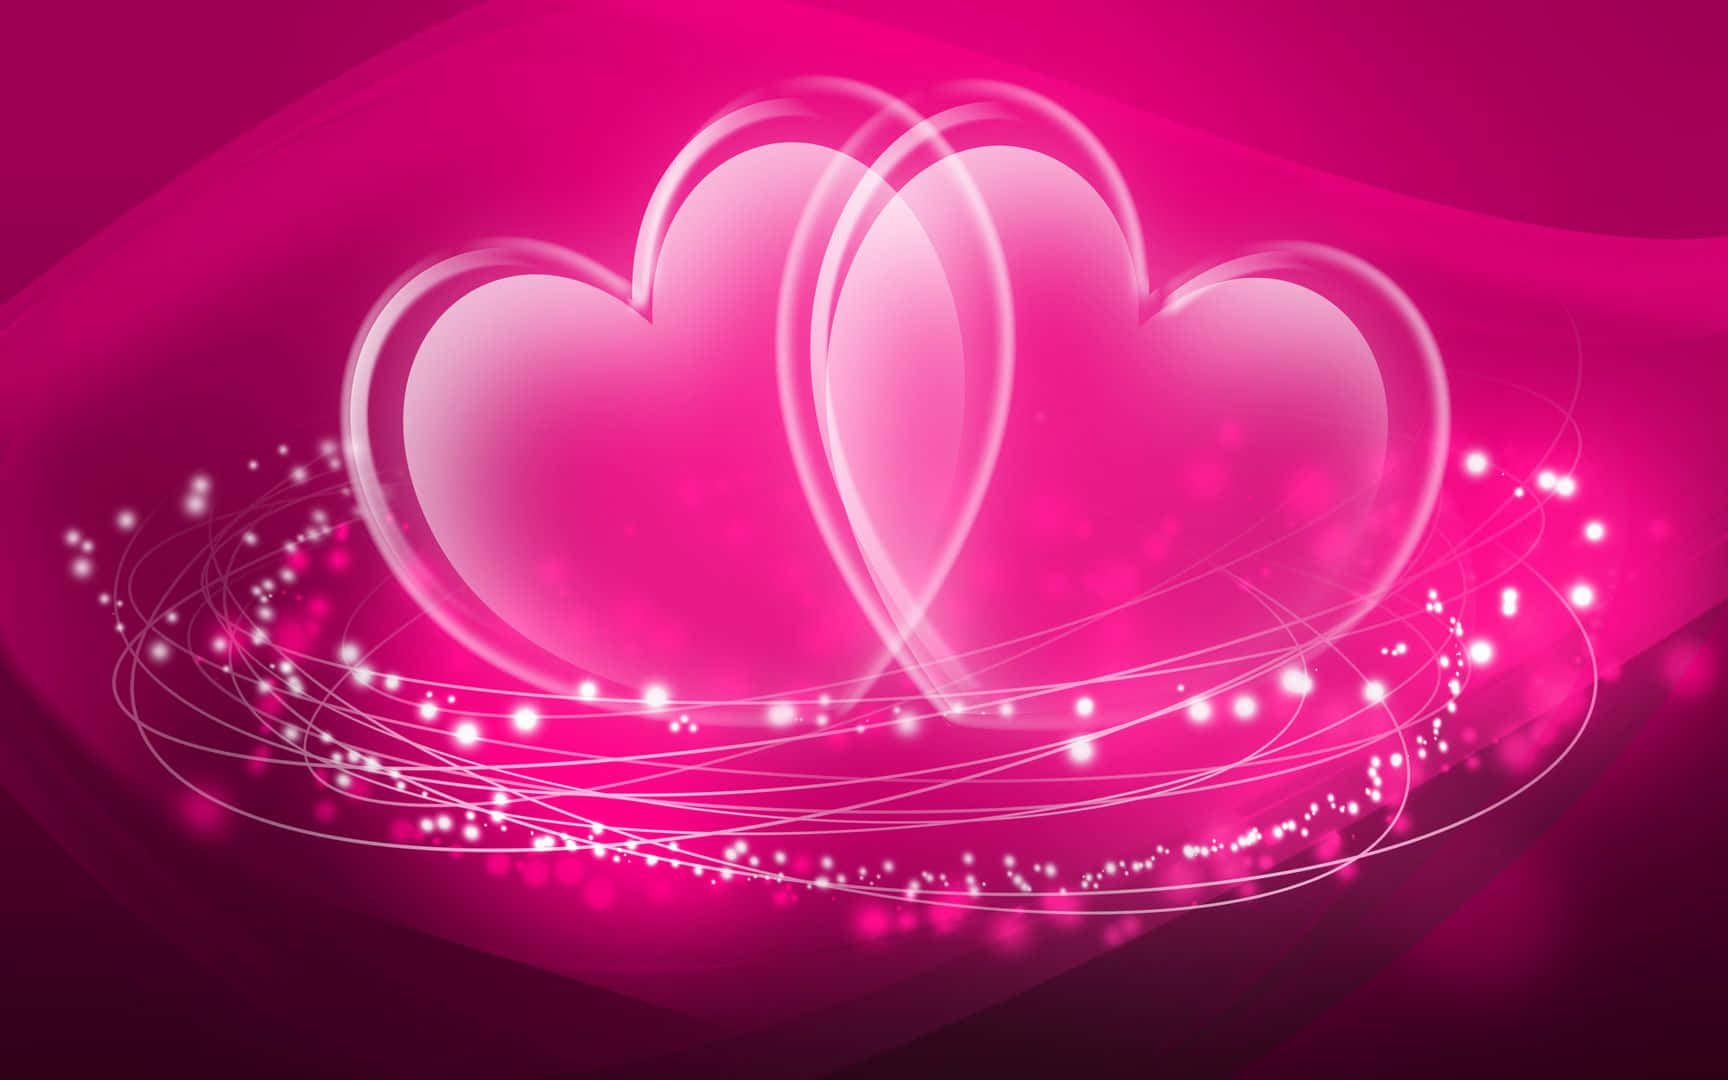 Two Fuchsia Pink Hearts Background